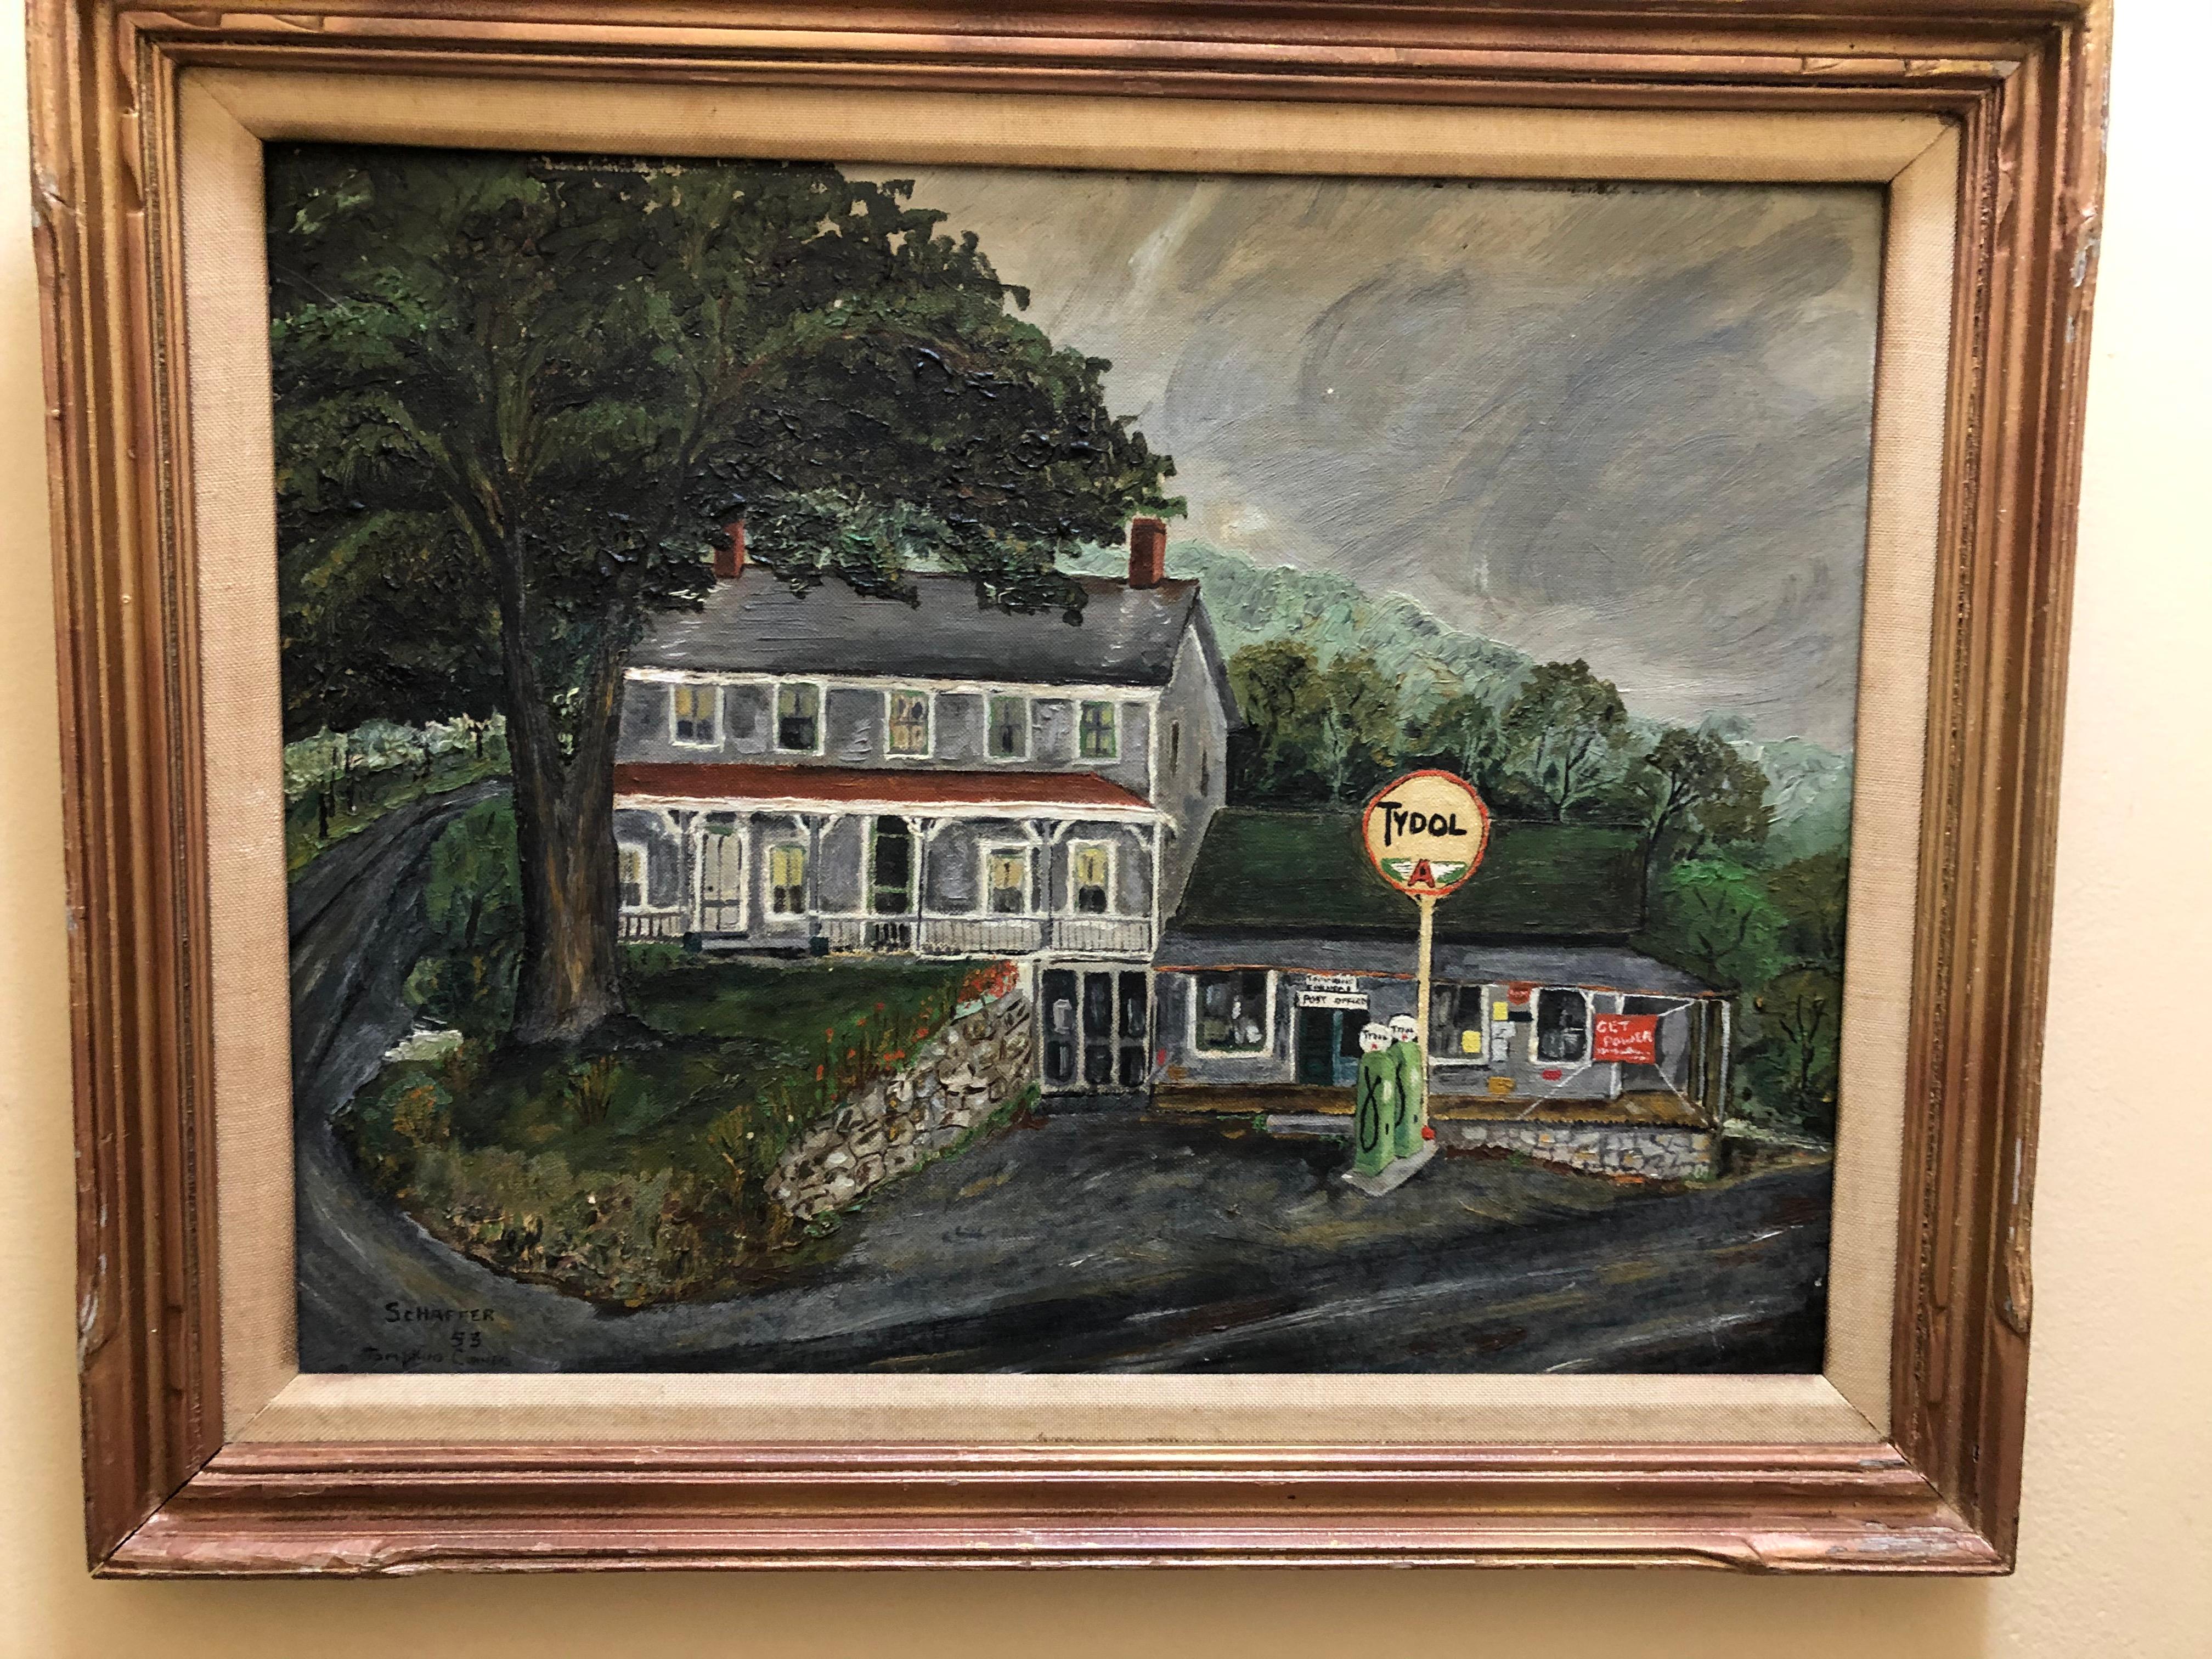 Charming 1953 oil on board painting signed Schaffer. We are not sure who the artist is, but they were obviously very talented in a folk/primitive style. They have really captured a bygone era. I believe Tompkins corner is in upstate New York.